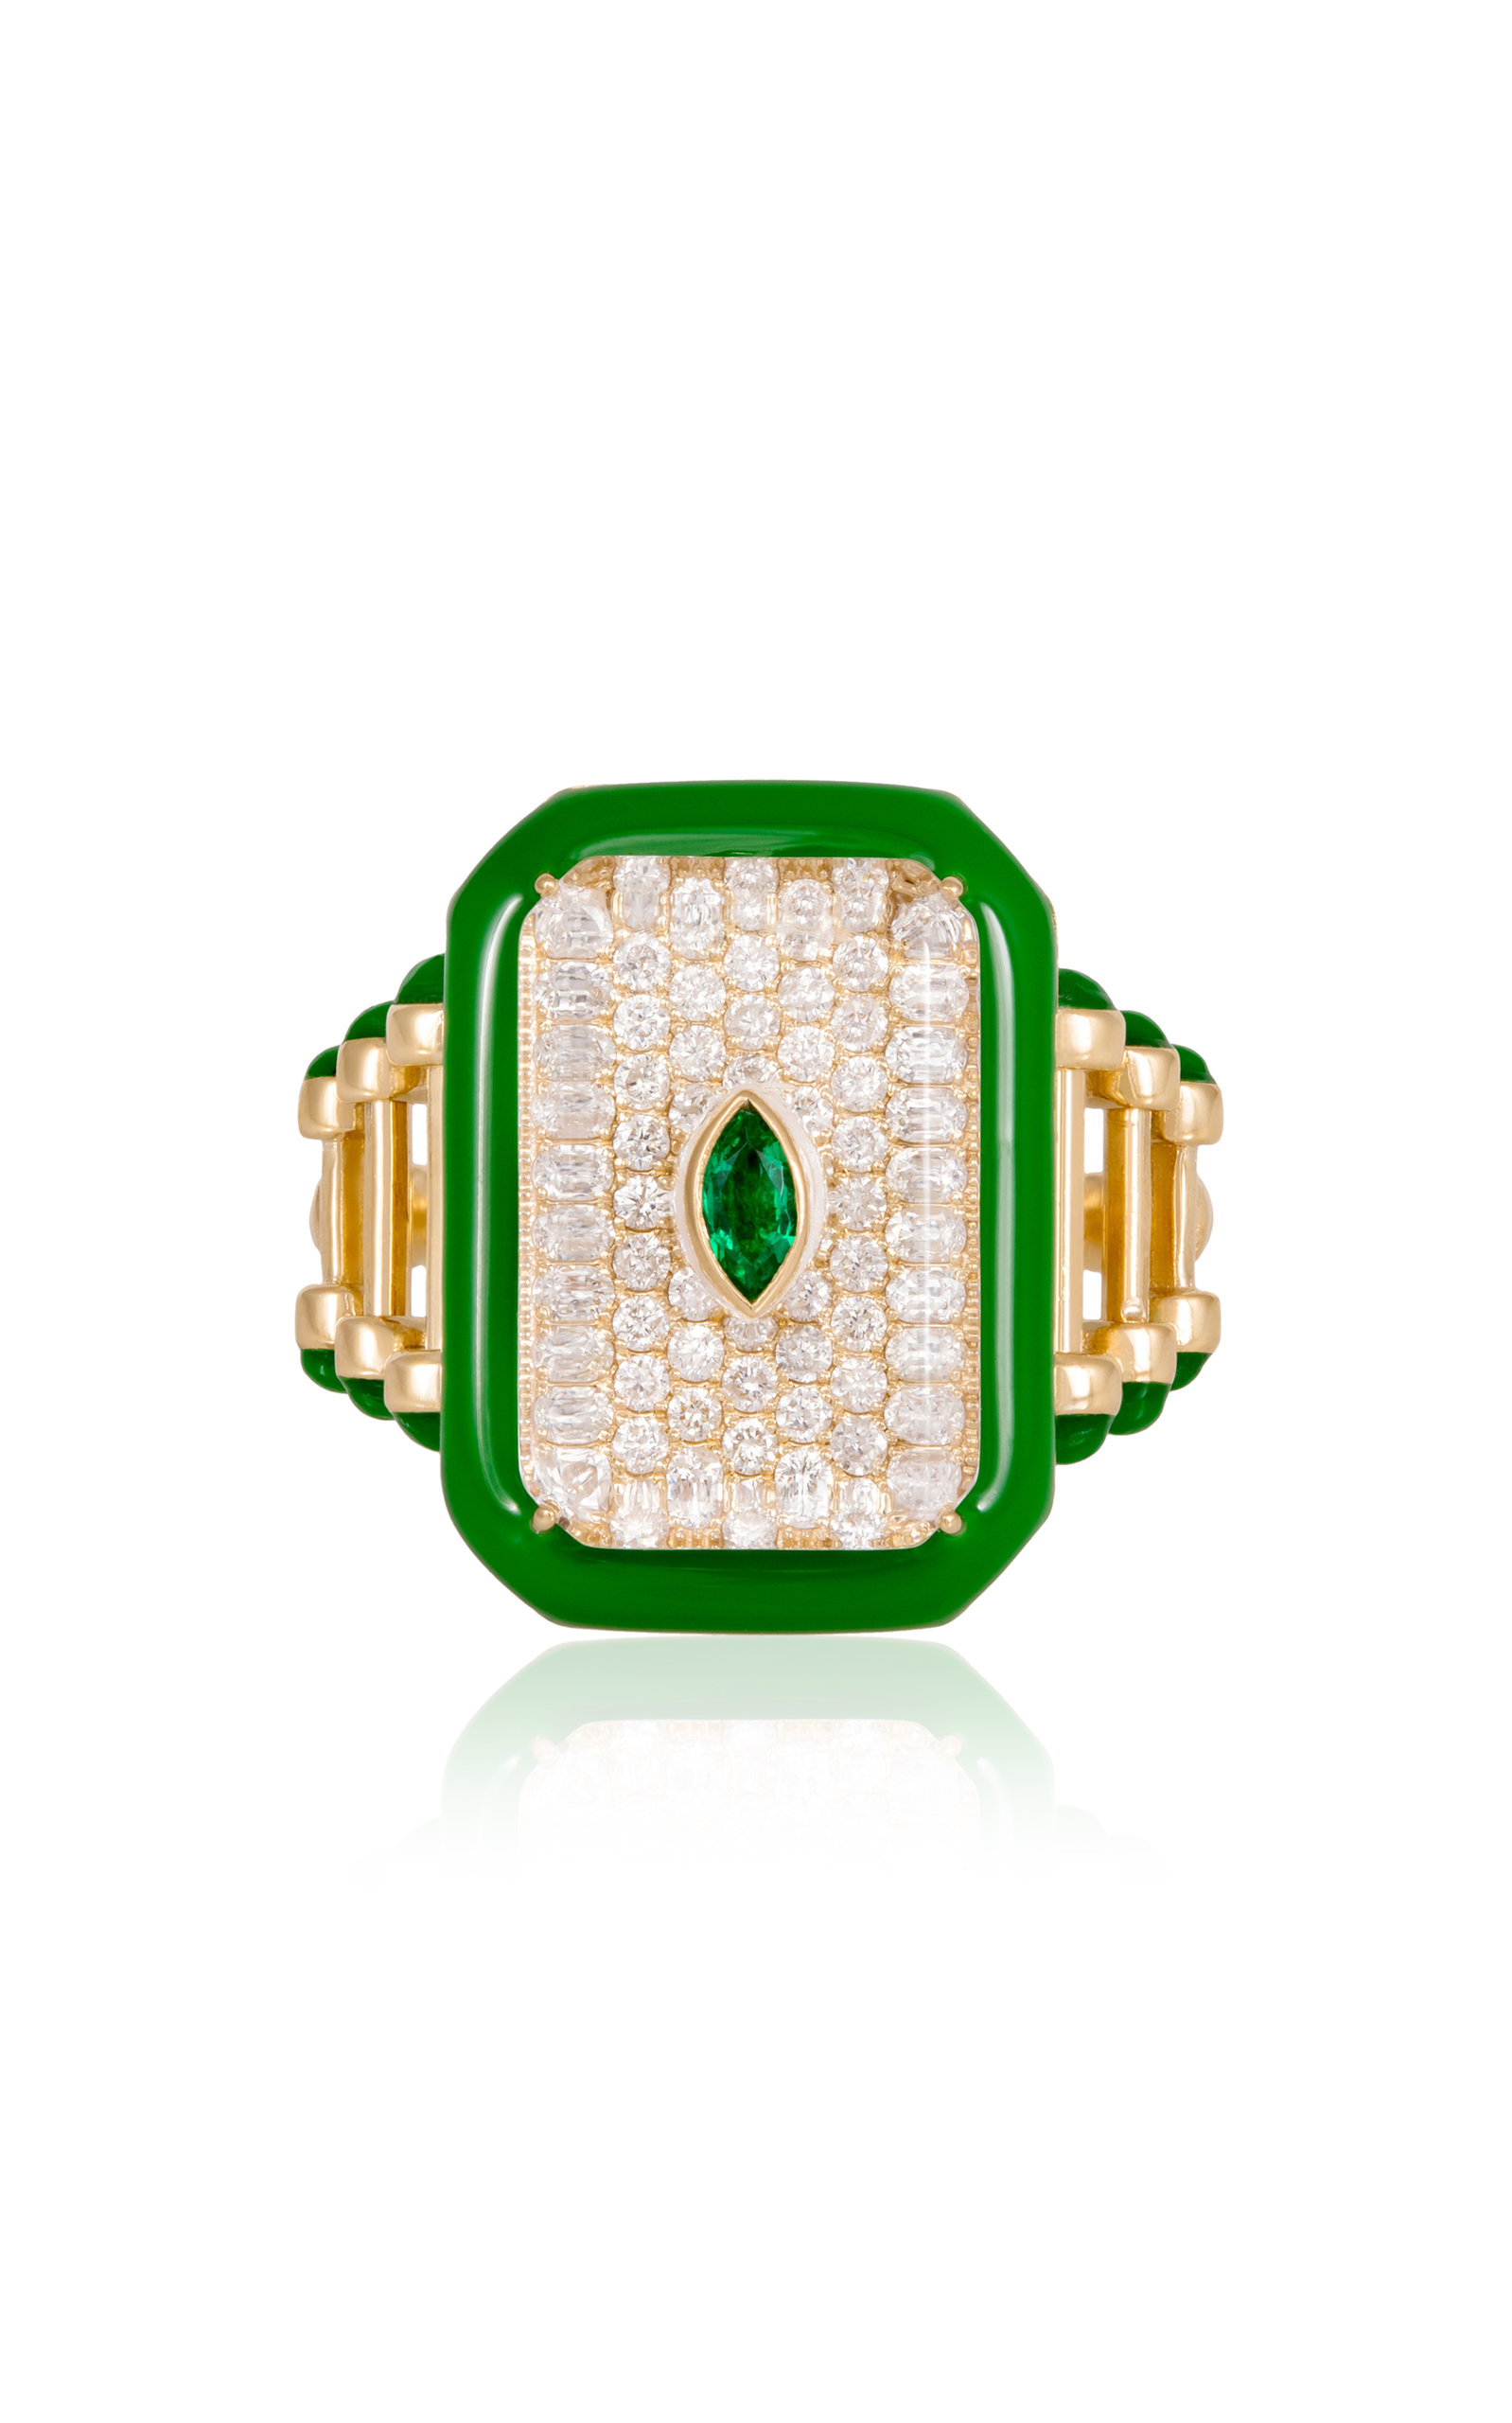 Moments in Evergreen 18K Yellow Gold Diamond; Emerald Ring